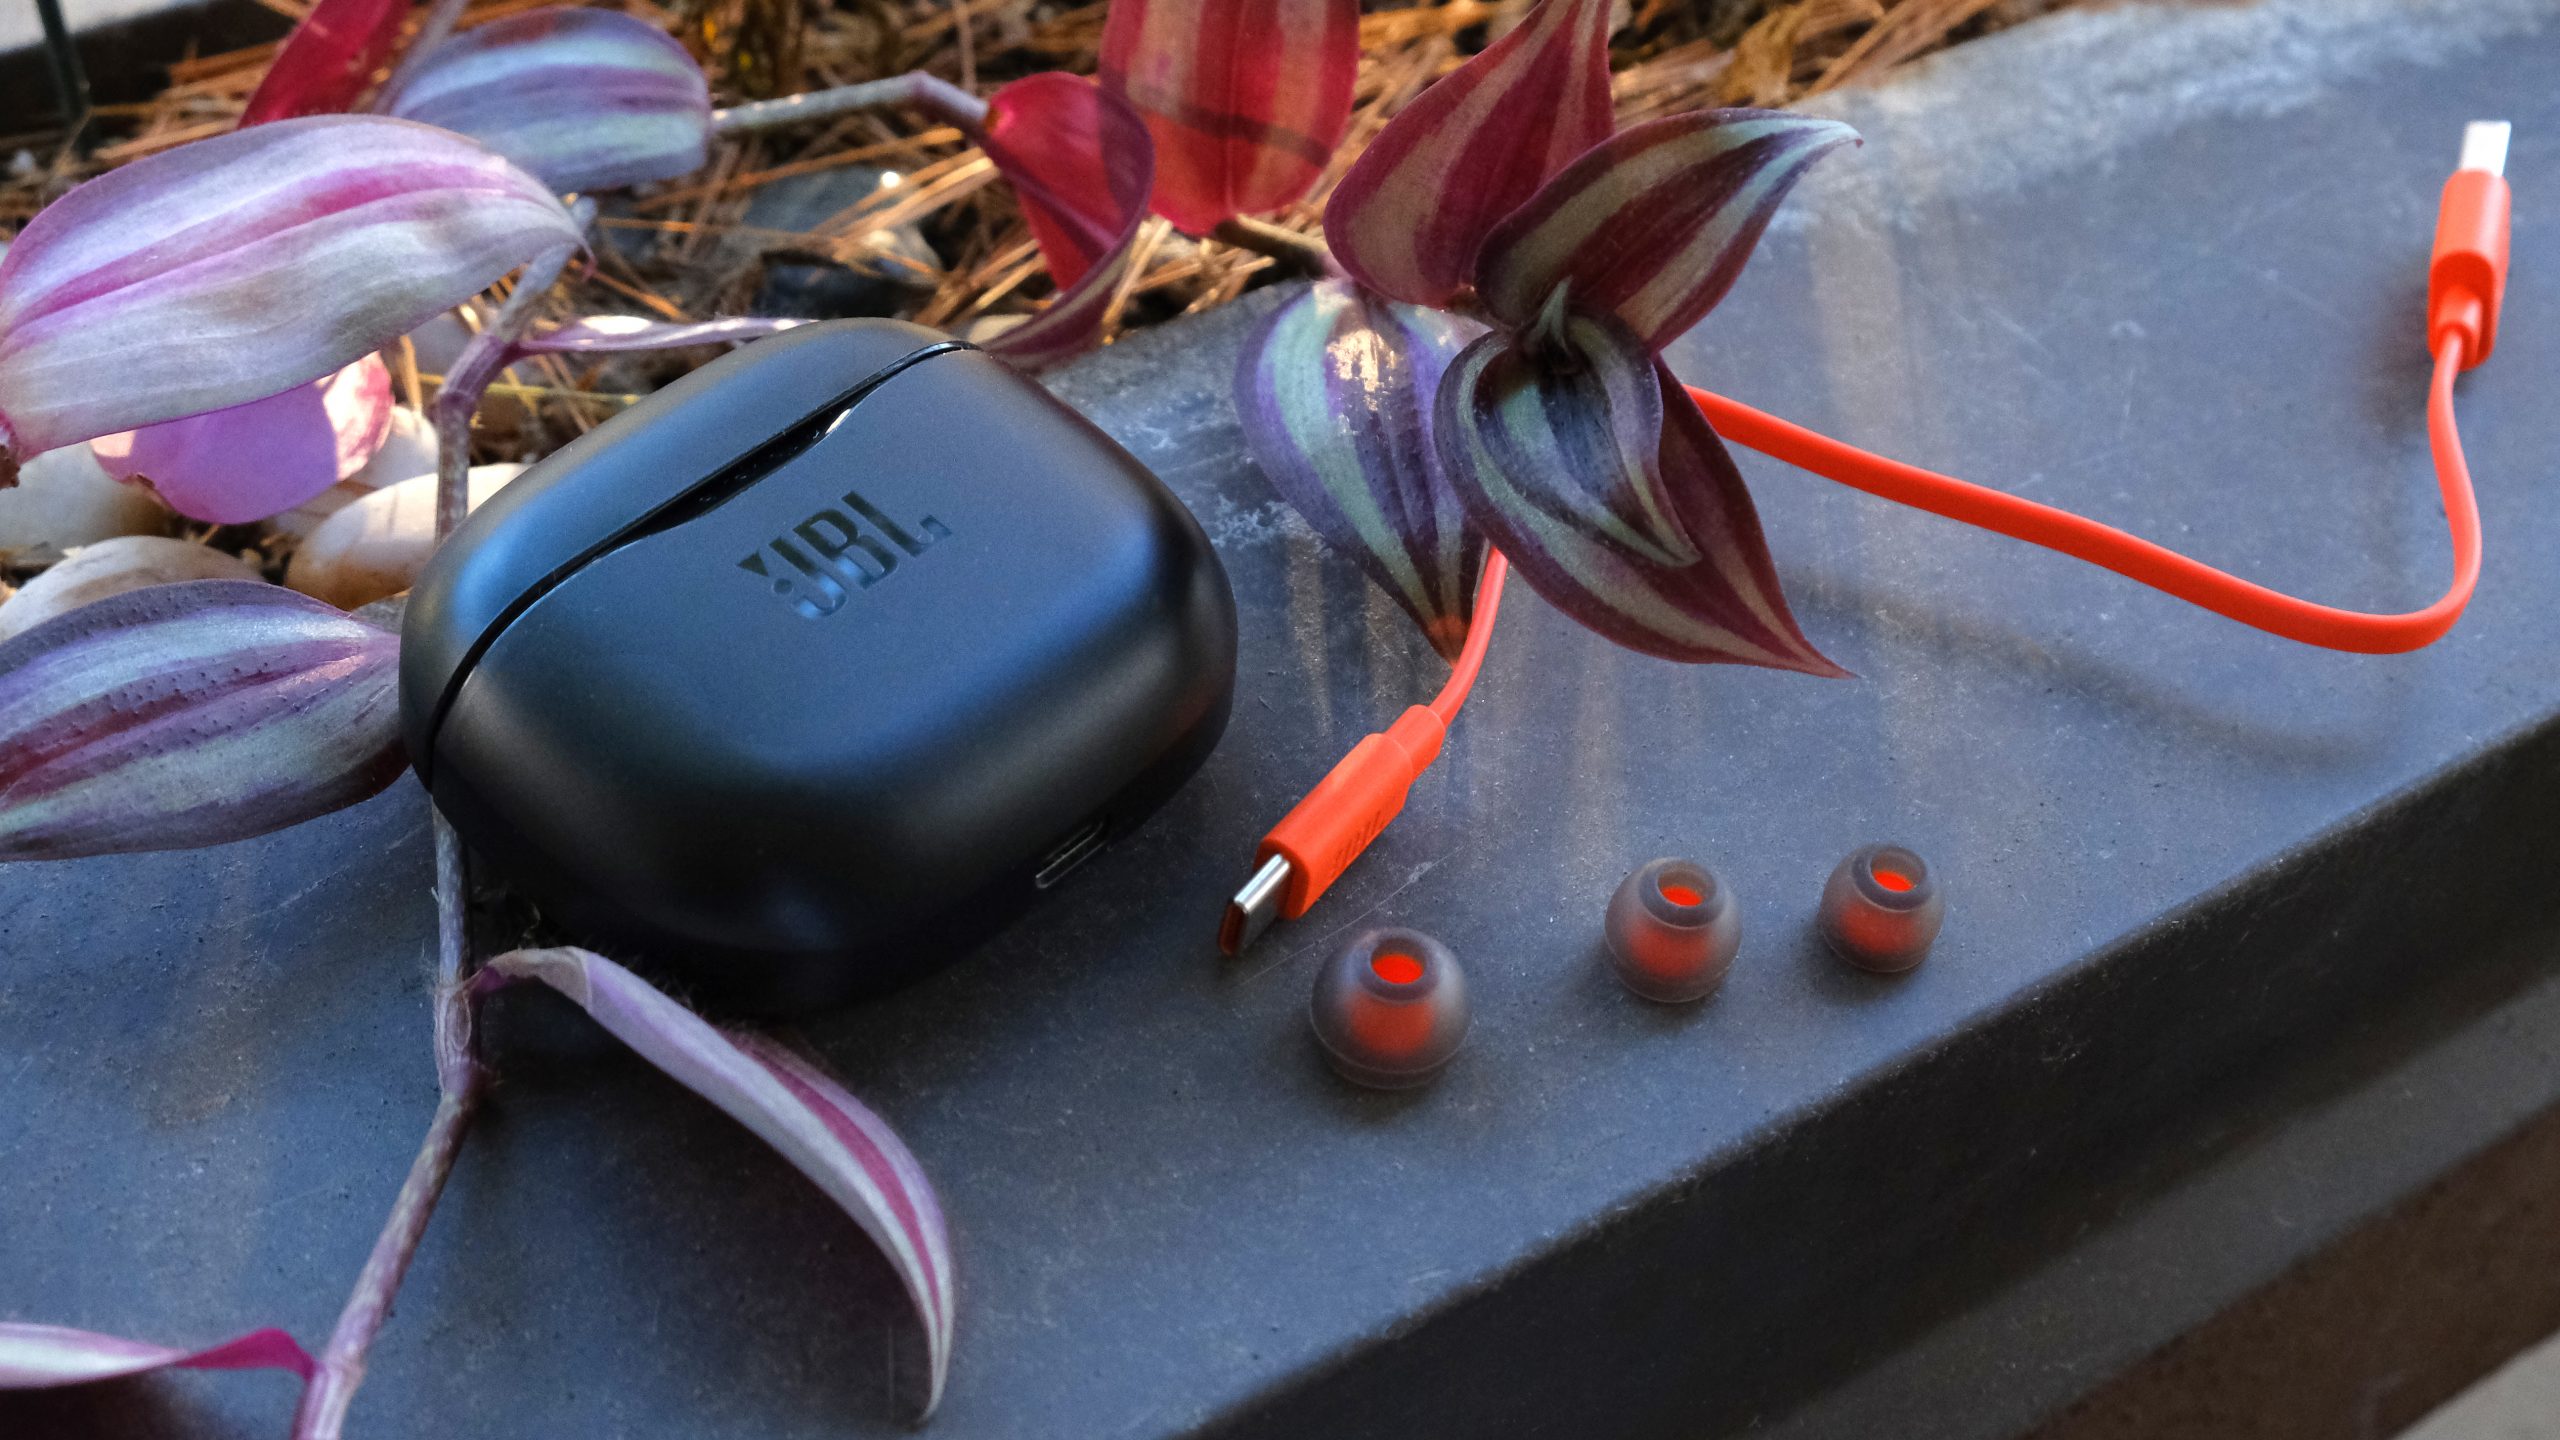 On a distressed metal ledge with a vine is the JBL Tune 125TWS with its accessories.